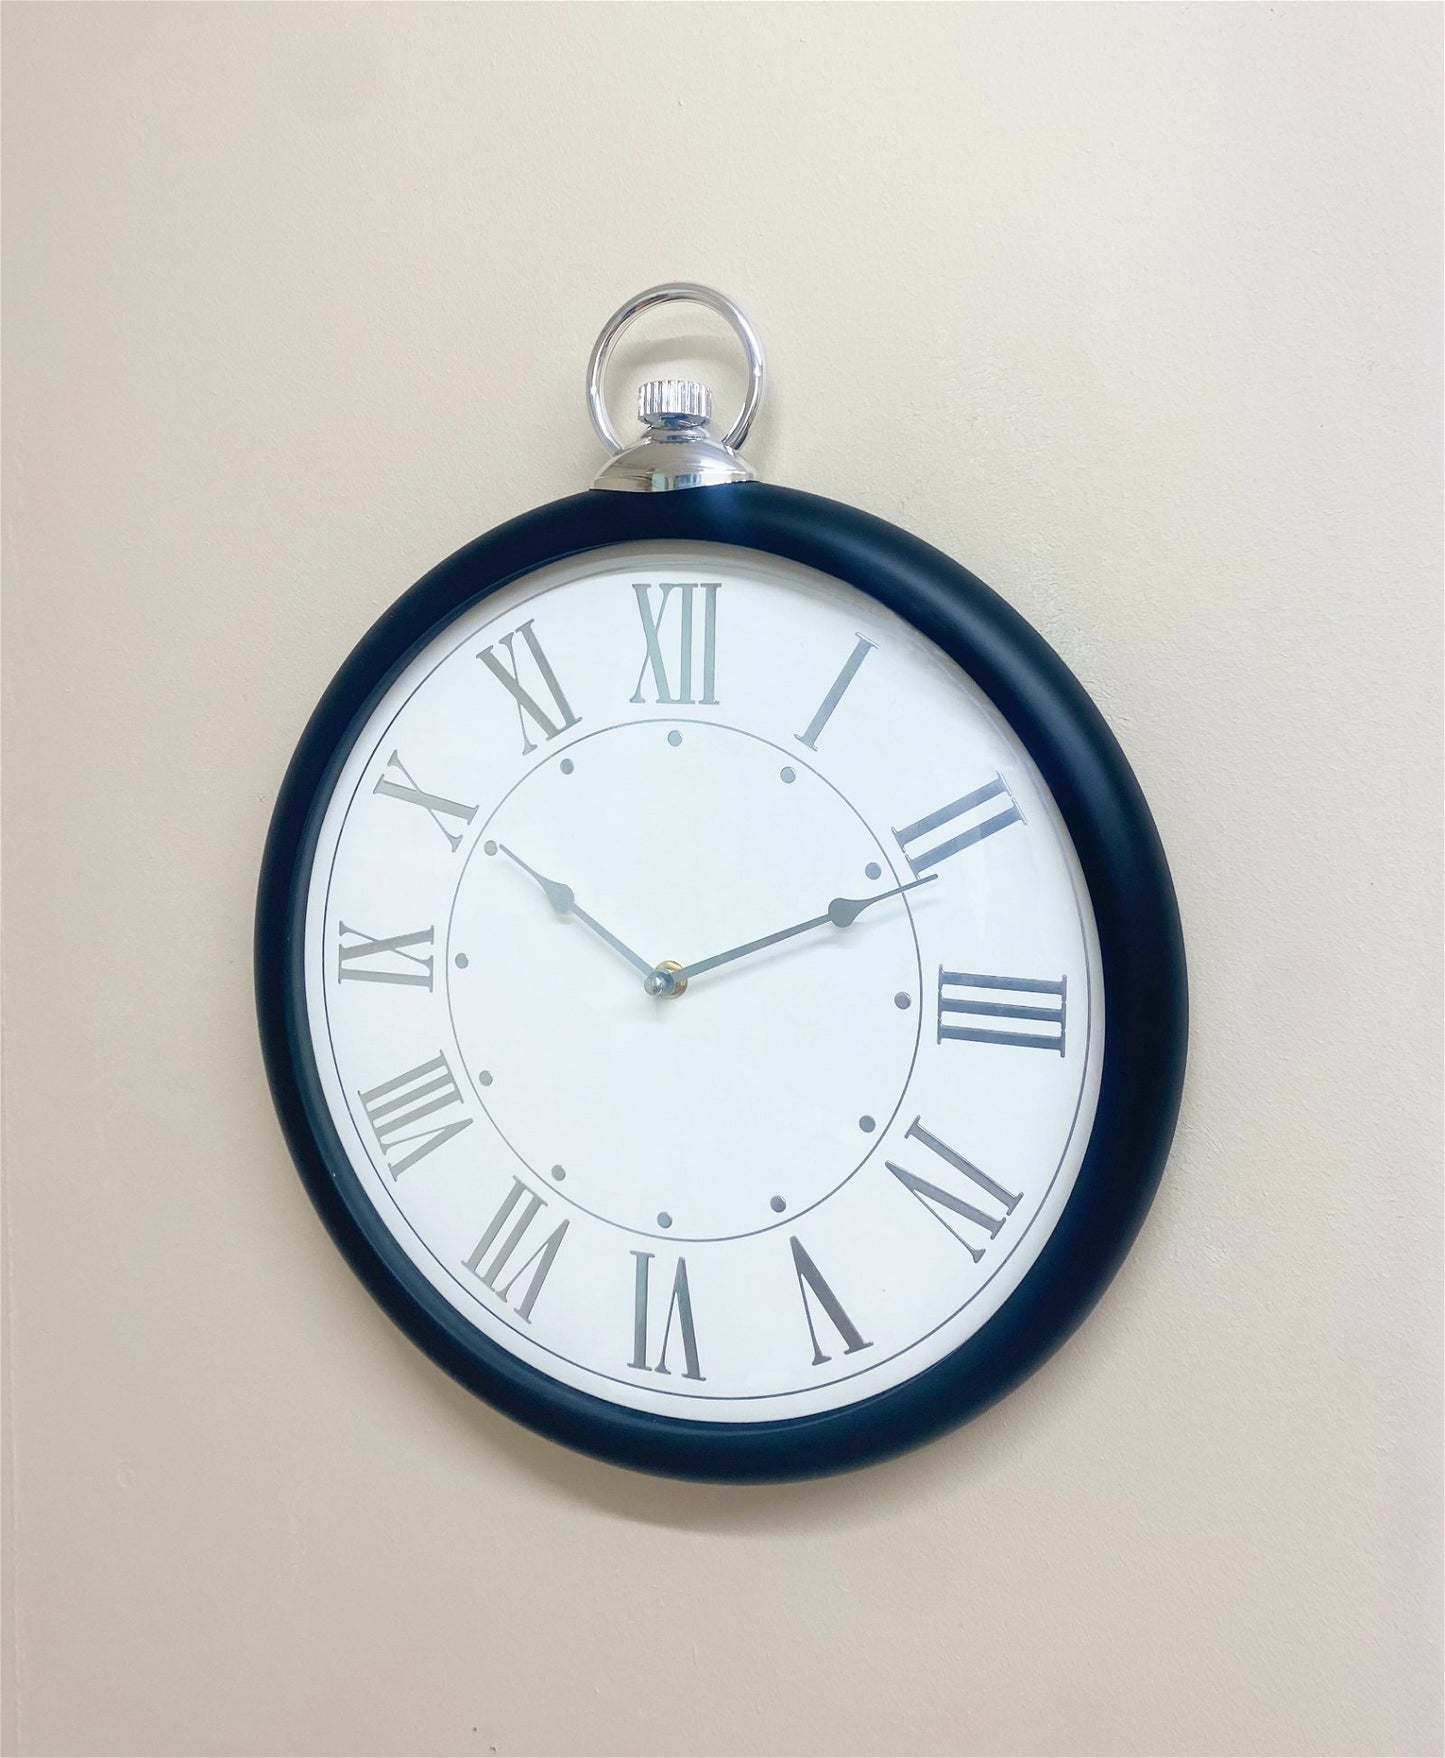 Round Black and Silver Clock 42cm